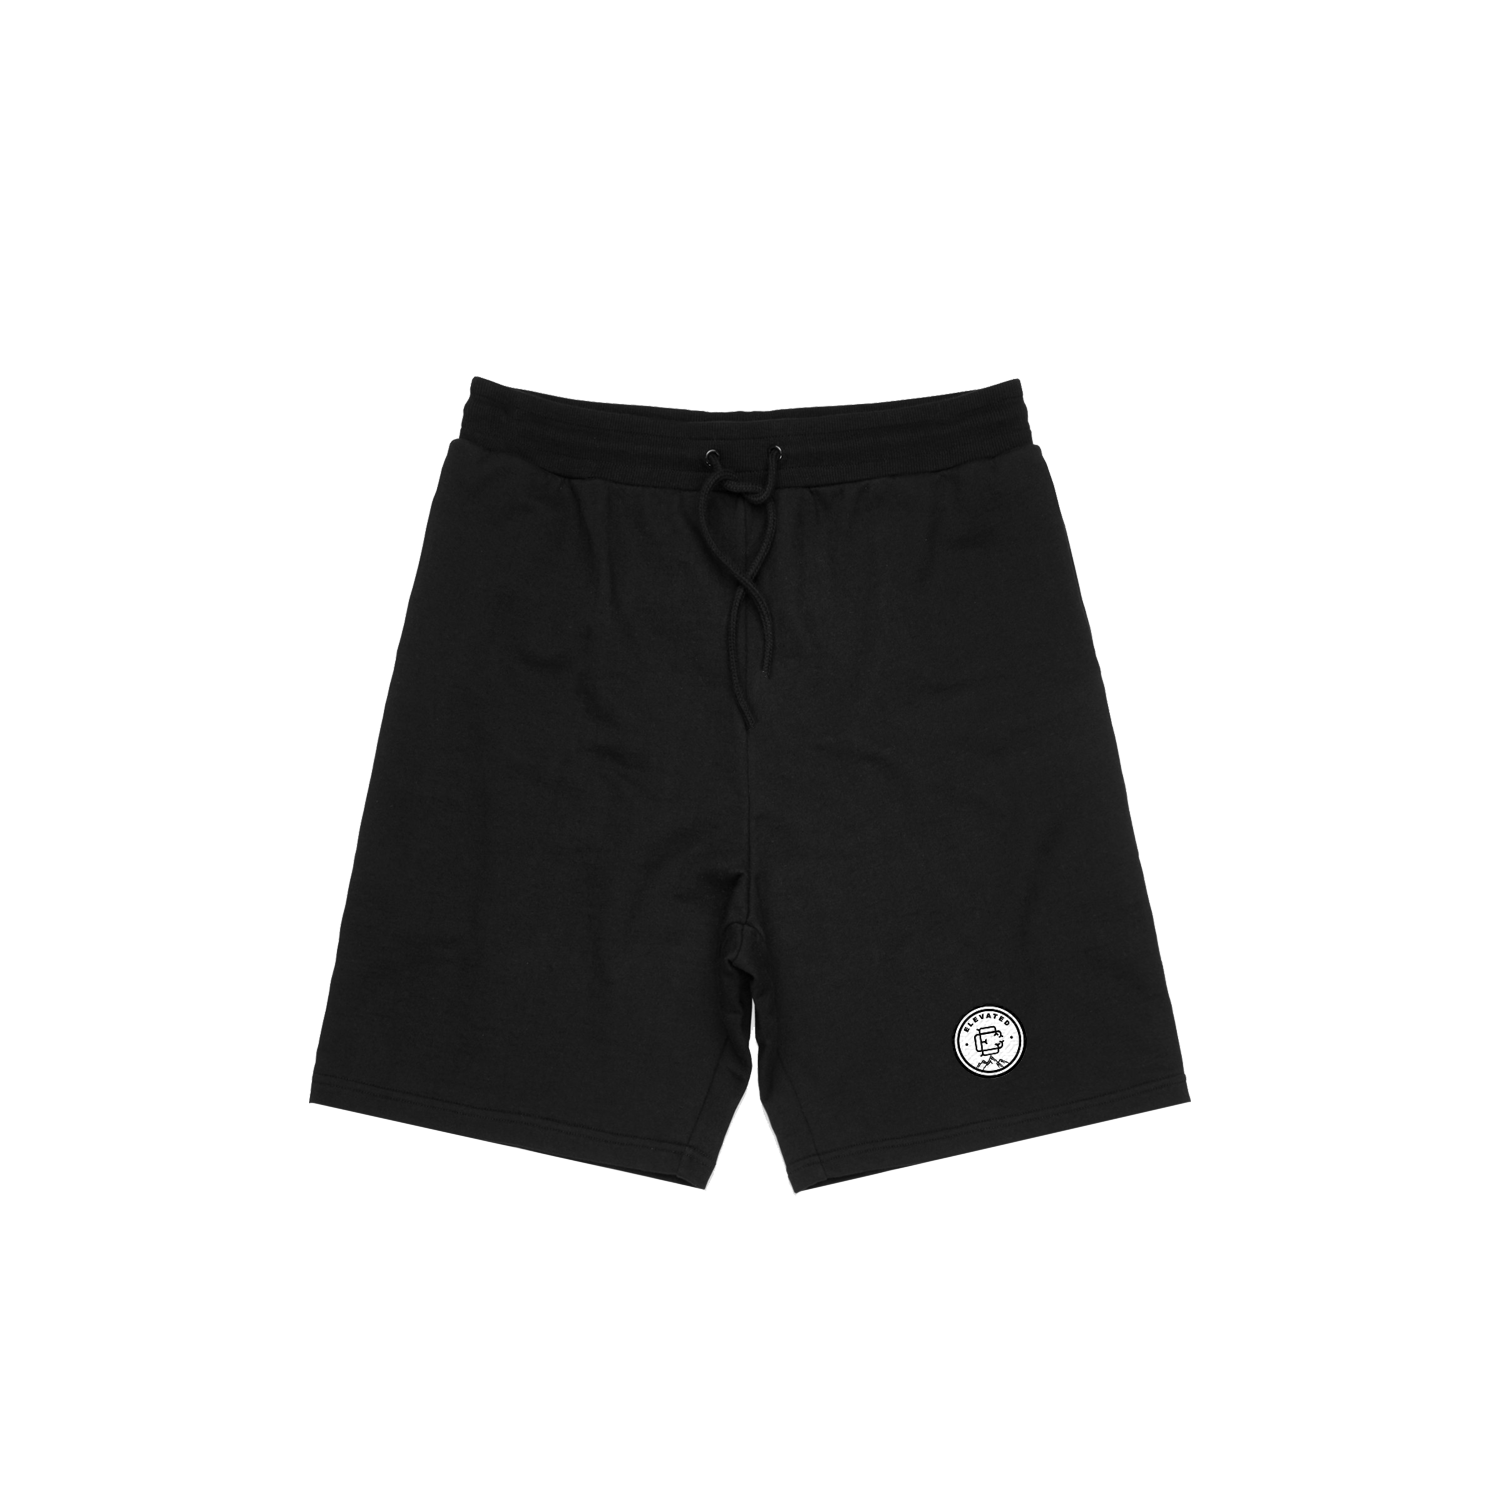 Elevated Premium Cotton Fitness Shorts- Black Widow Black (SOLD OUT)